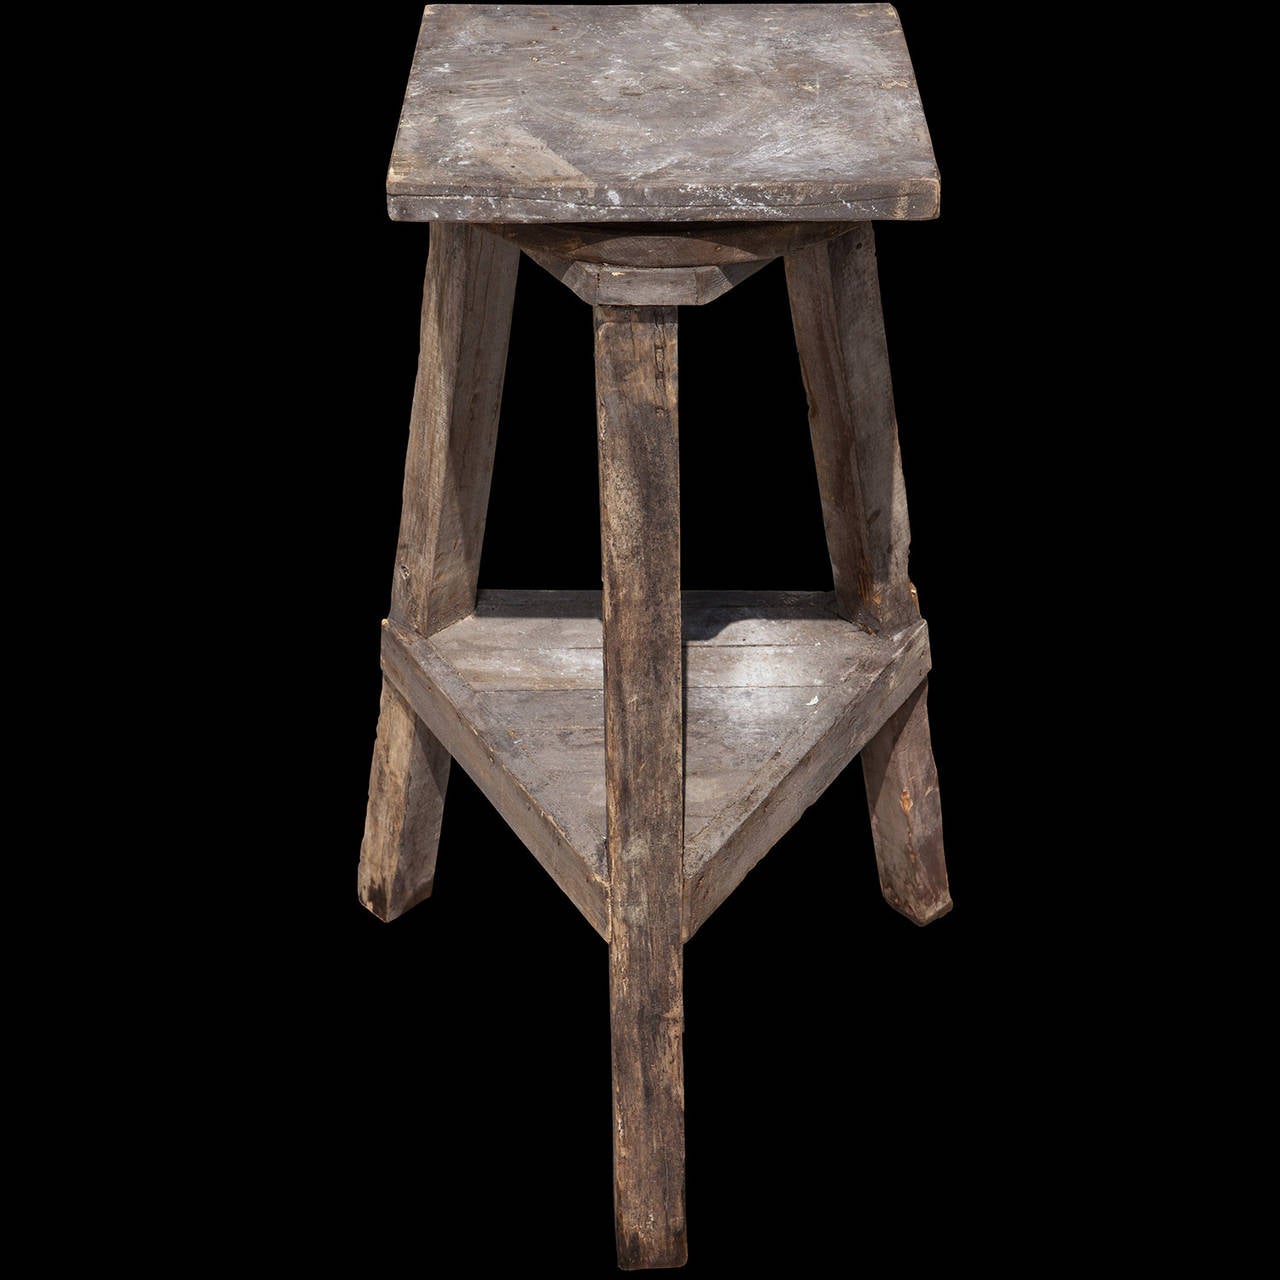 Primitive Potter’s Stand In Distressed Condition In Culver City, CA